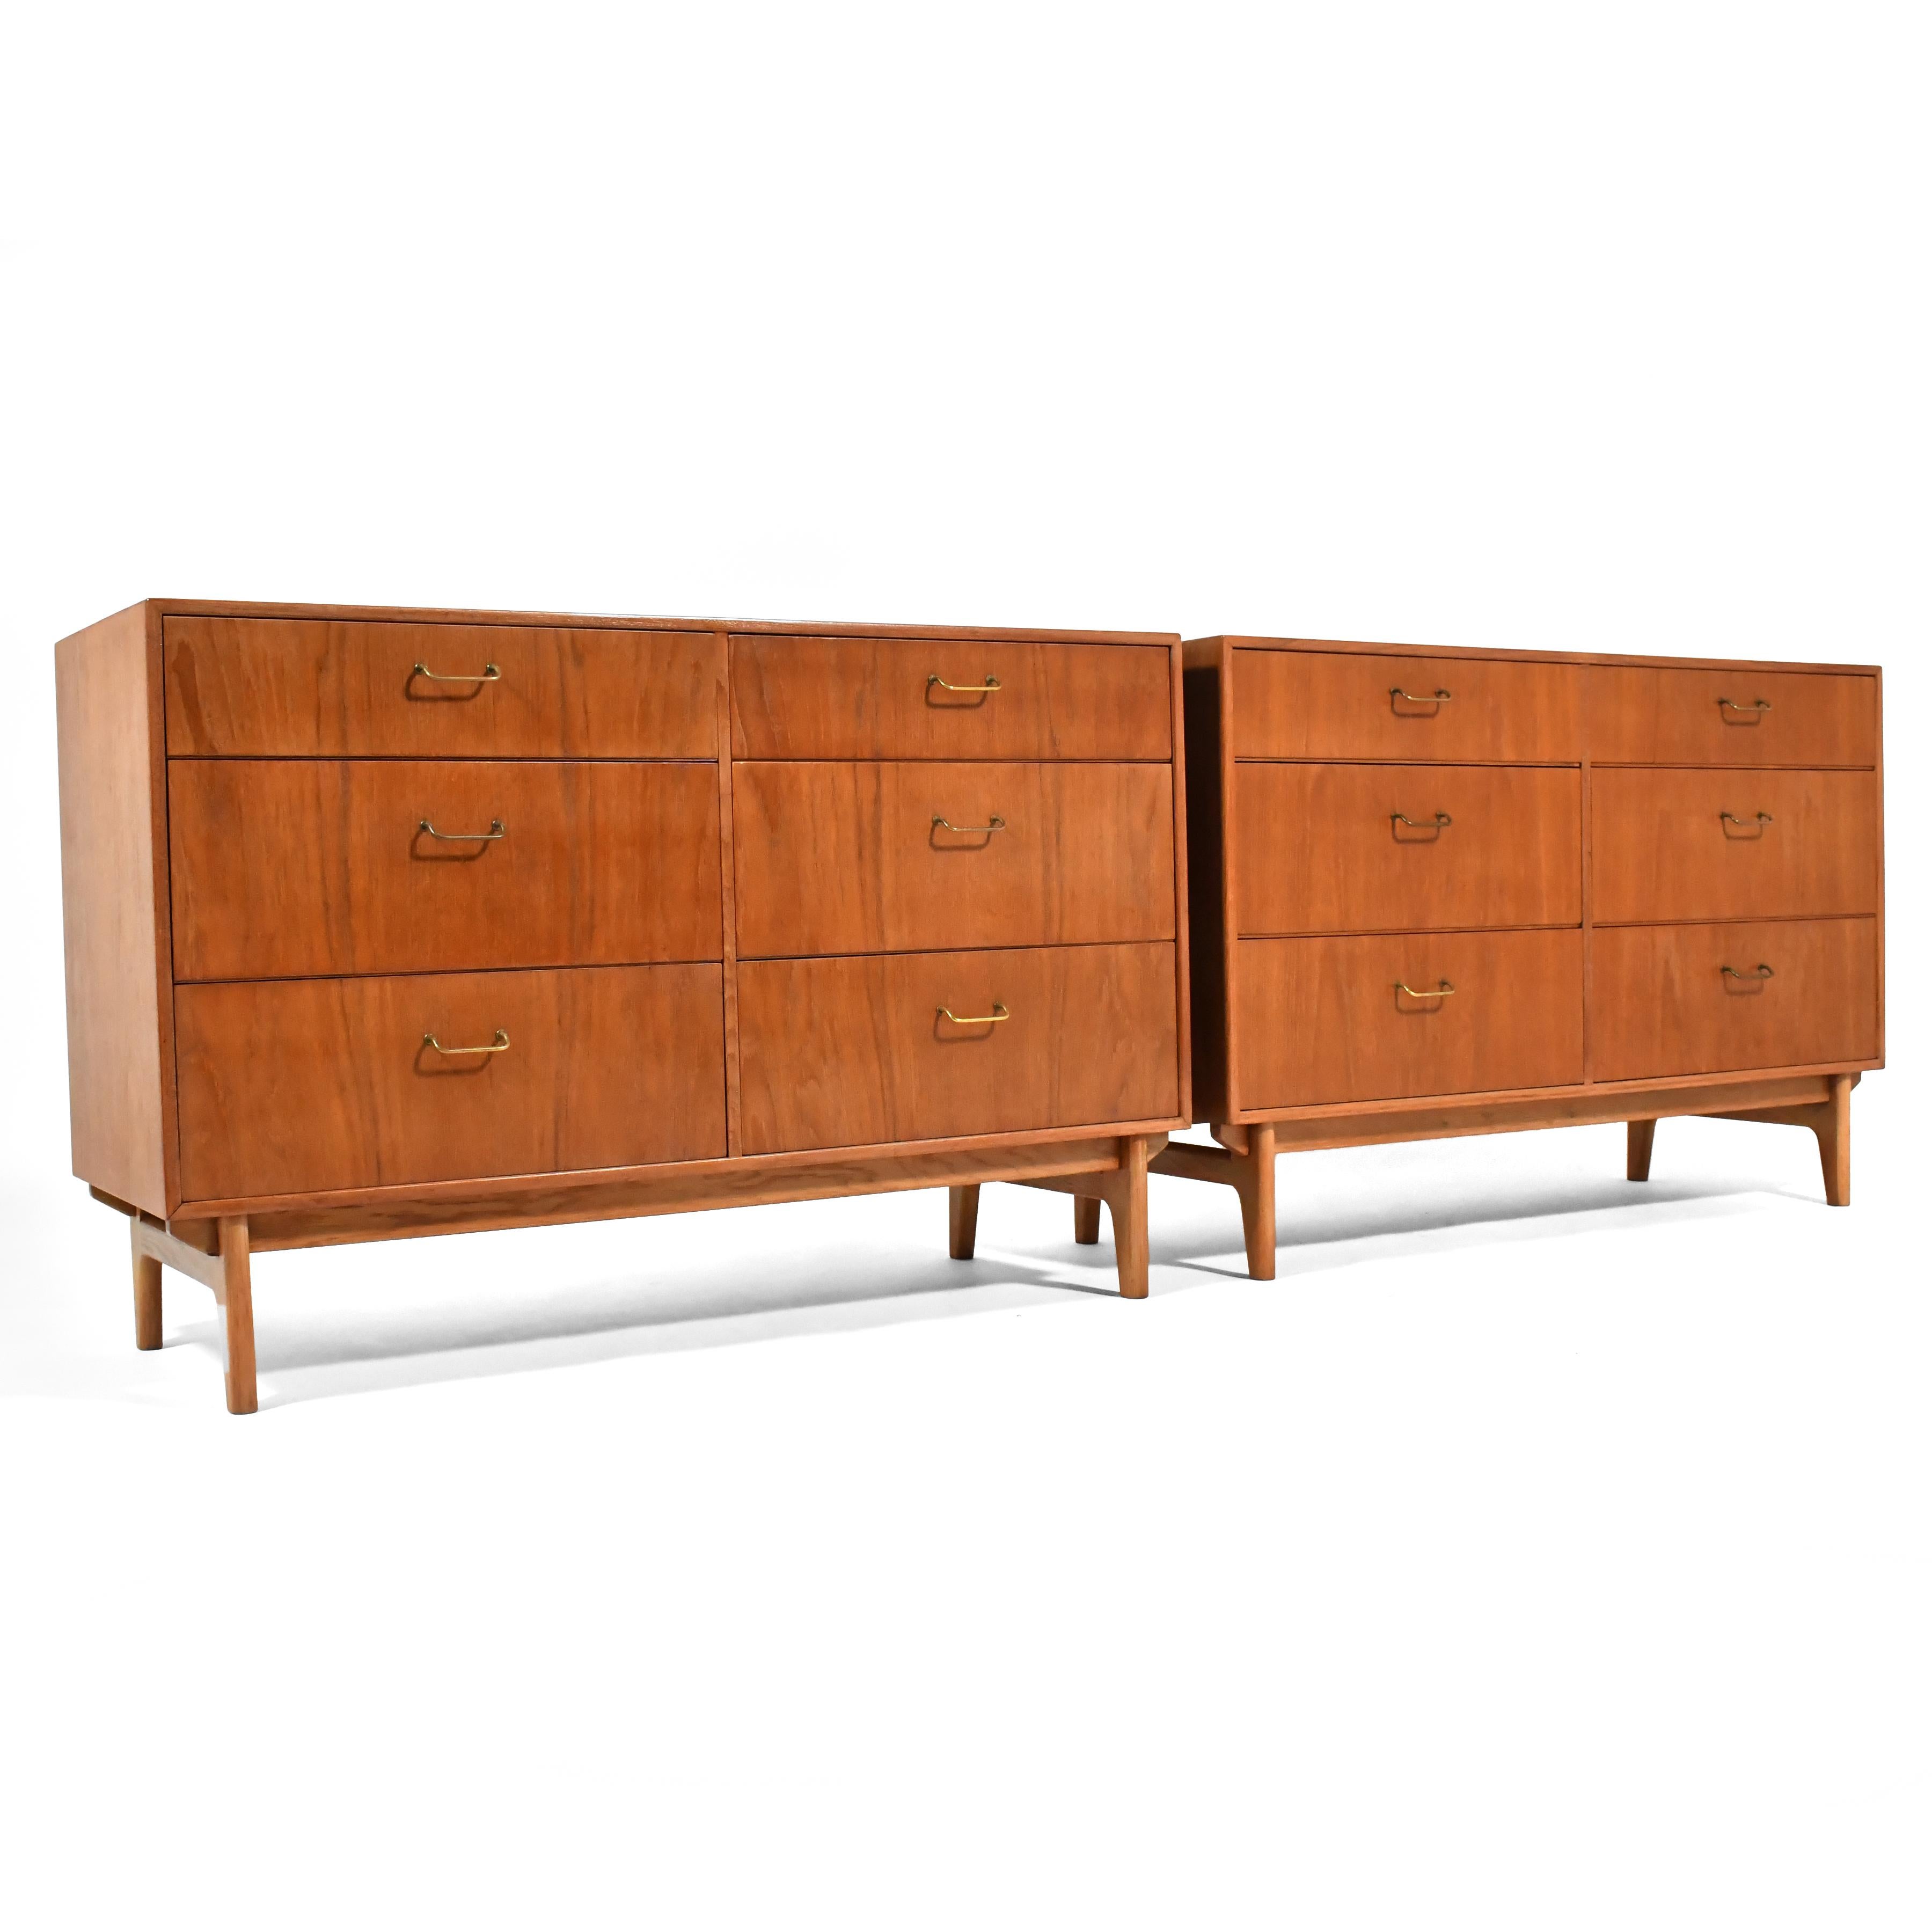 These beautiful Danish modern dressers in teak and oak by Torben Strandgaard were finely crafted by Møbelfabriken Falster and are beautifully detailed with a chassis base and brass wire pulls. 
In additional to this matched pair of dressers, we have